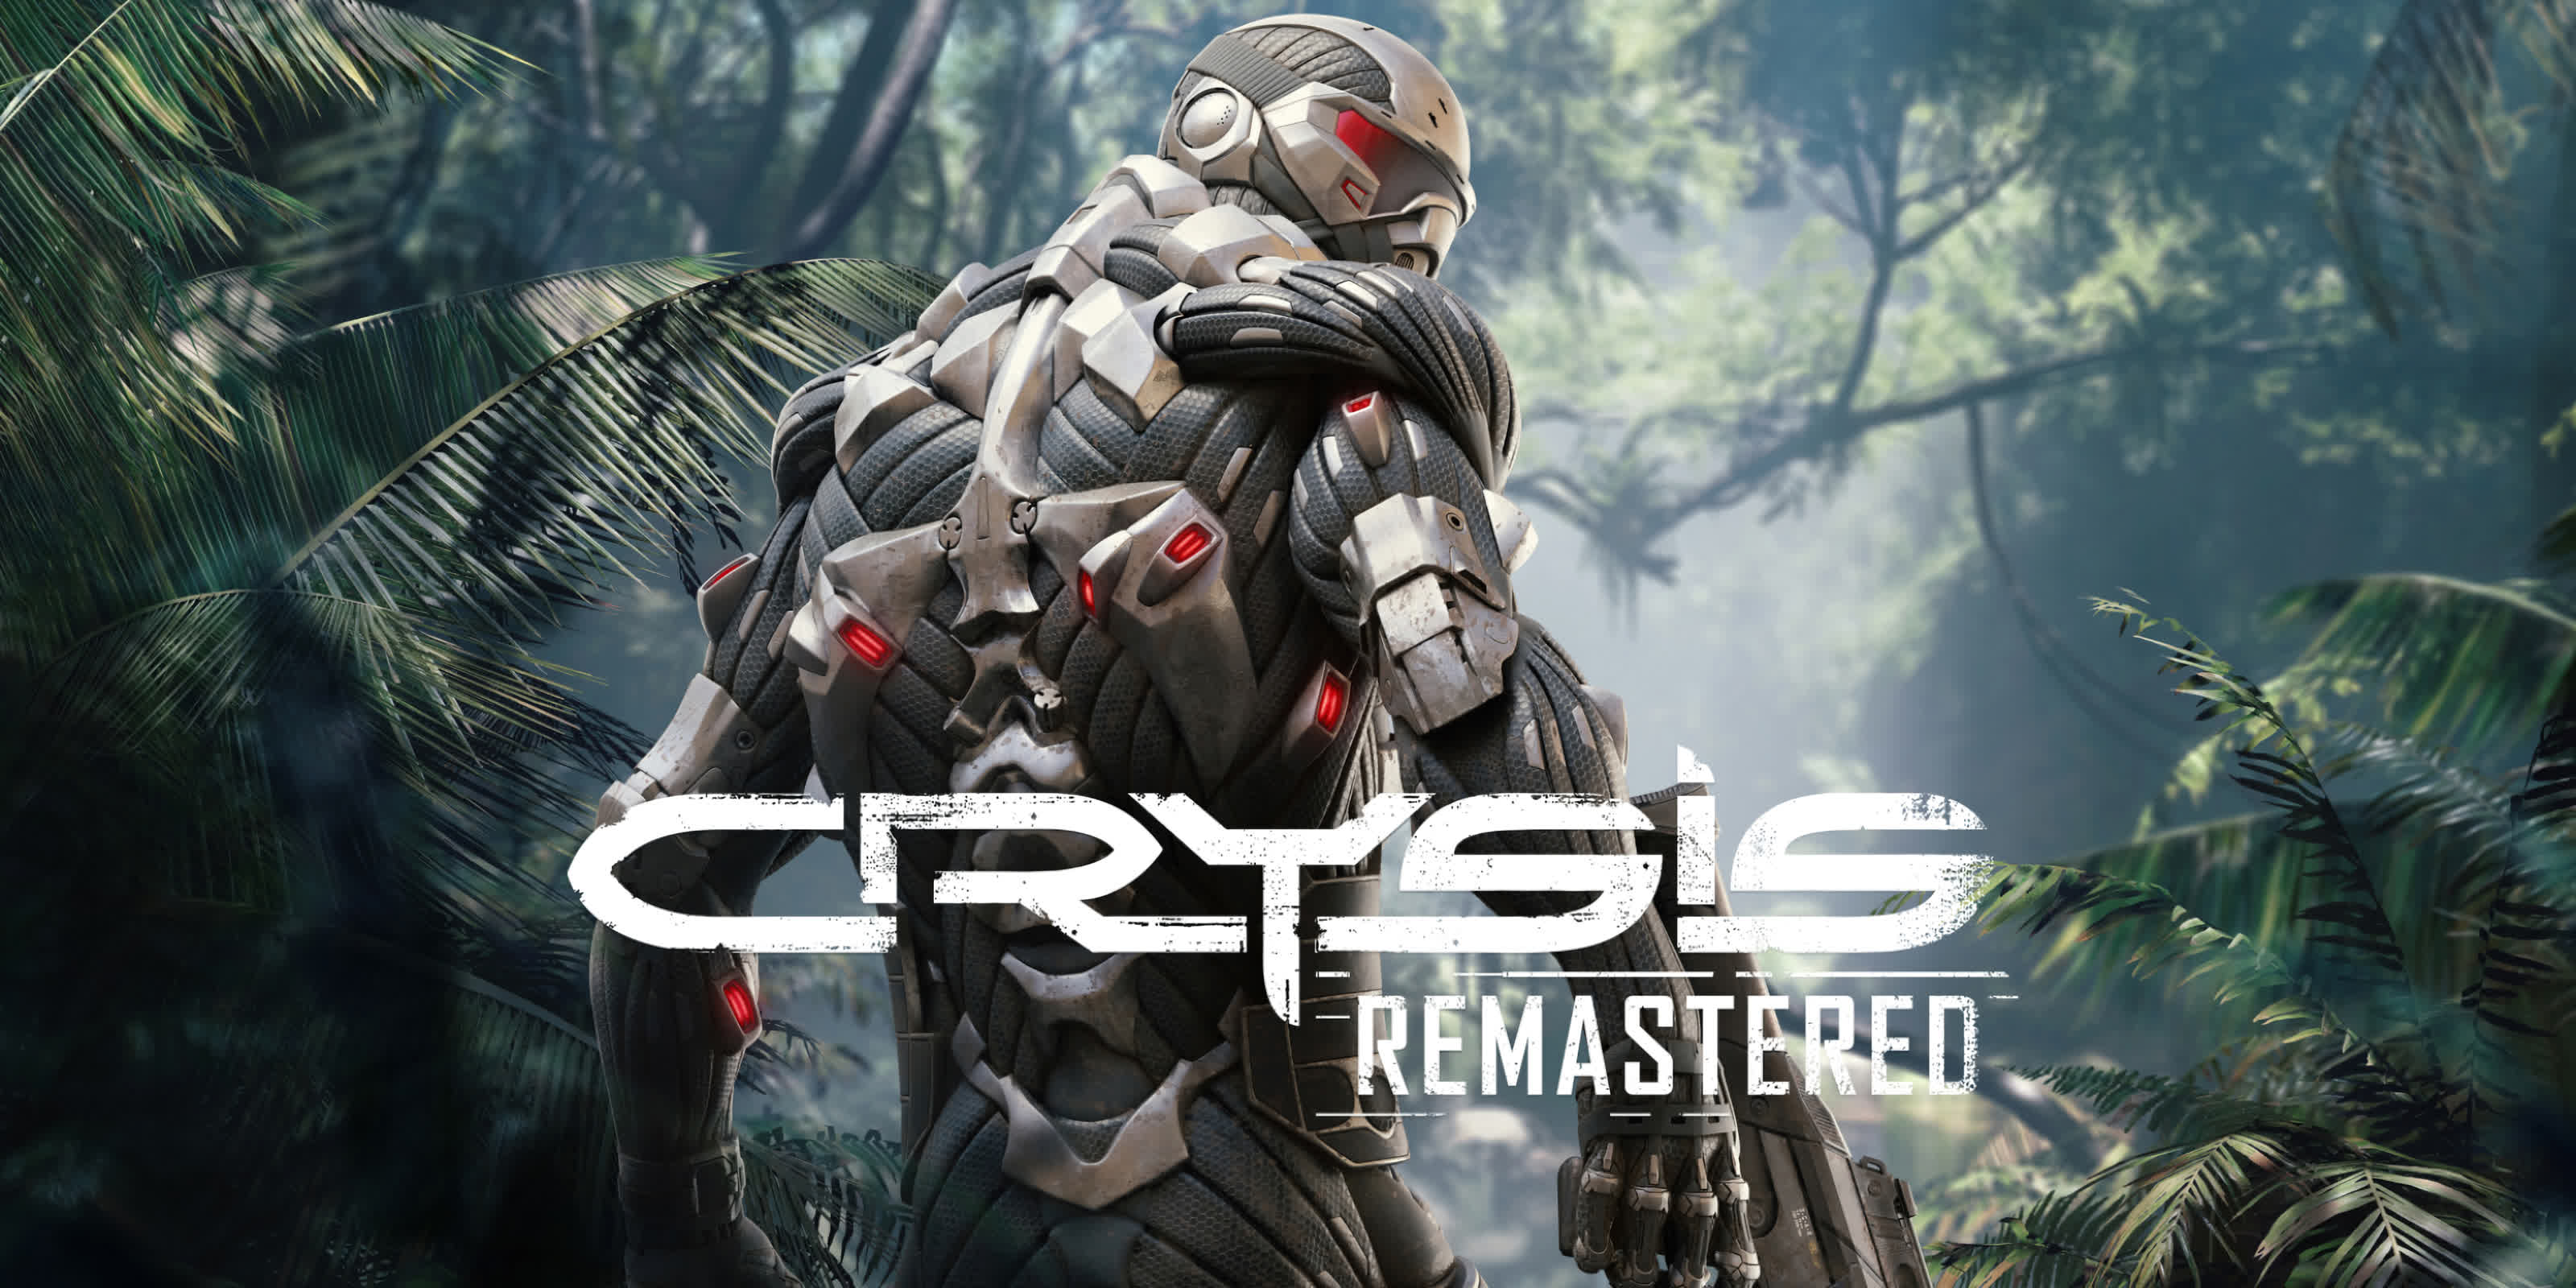 Nvidia is offering a free copy of Crysis Remastered for PC to new GeForce Now subscribers